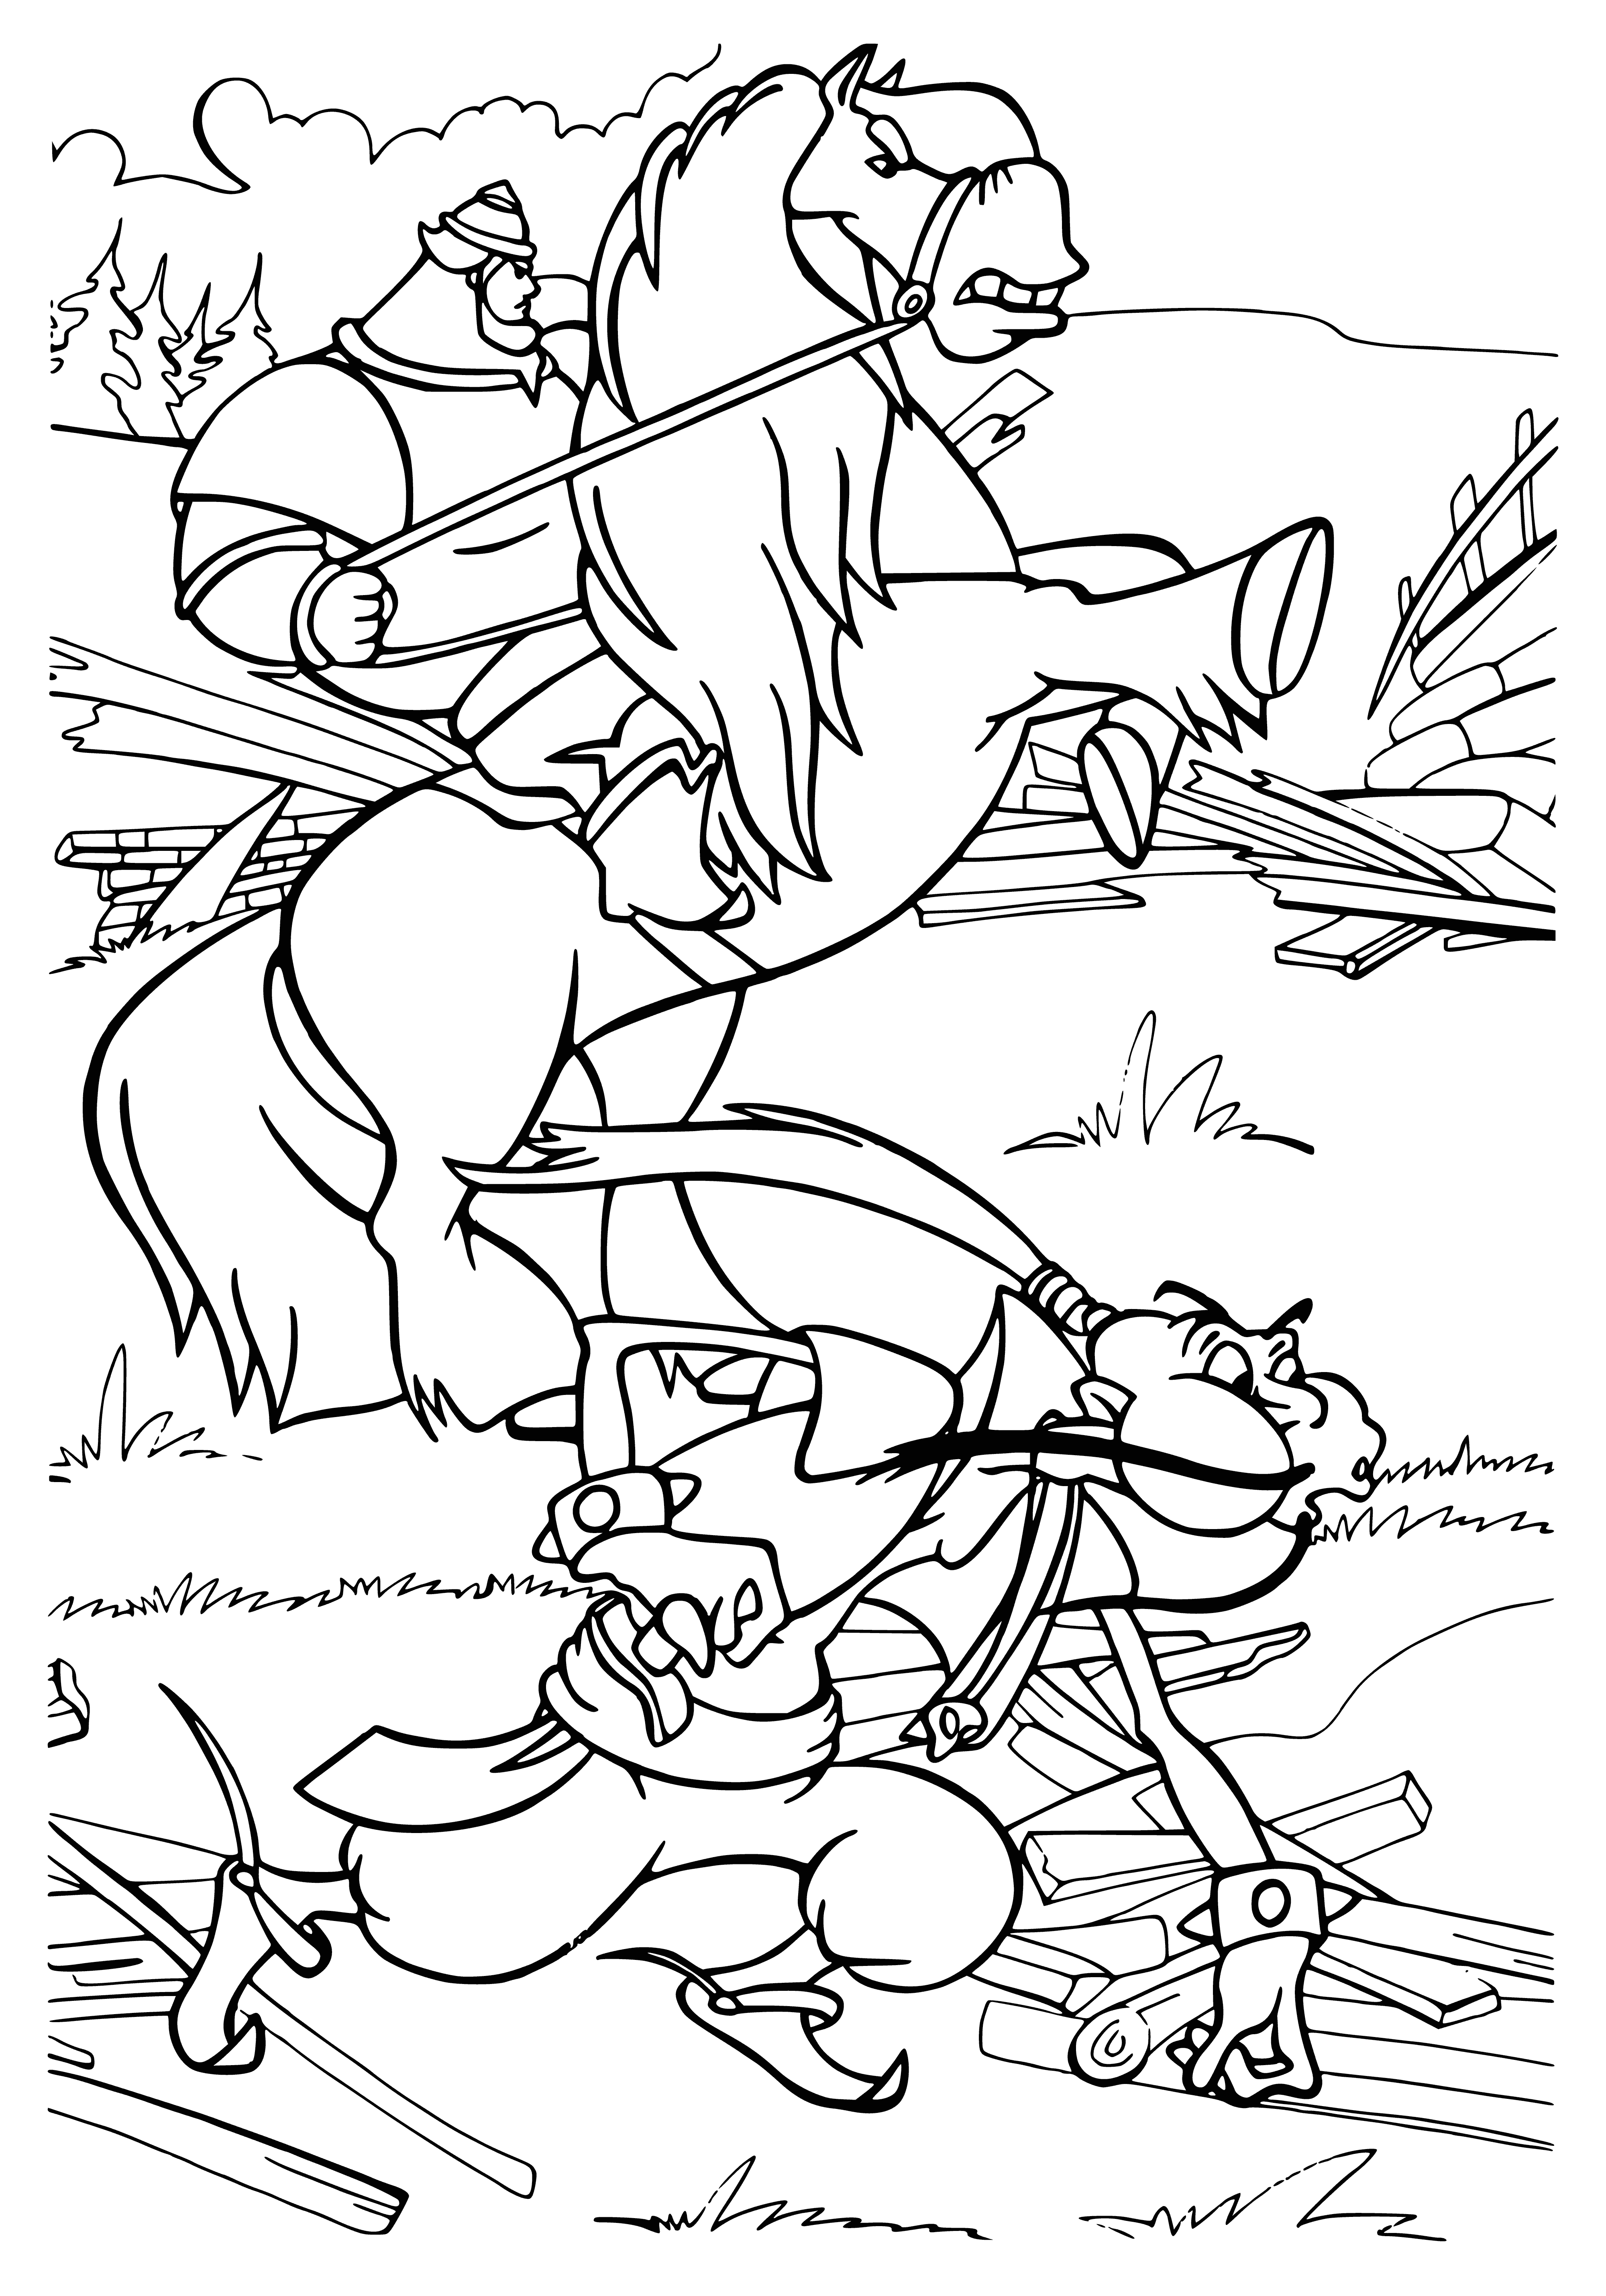 coloring page: Ilya Muromets faces off with Nightingale the Robber, a legendary bird with glowing red eyes atop a pile of treasure, in a Russian folktale. He prepares to do battle and reclaim the loot.